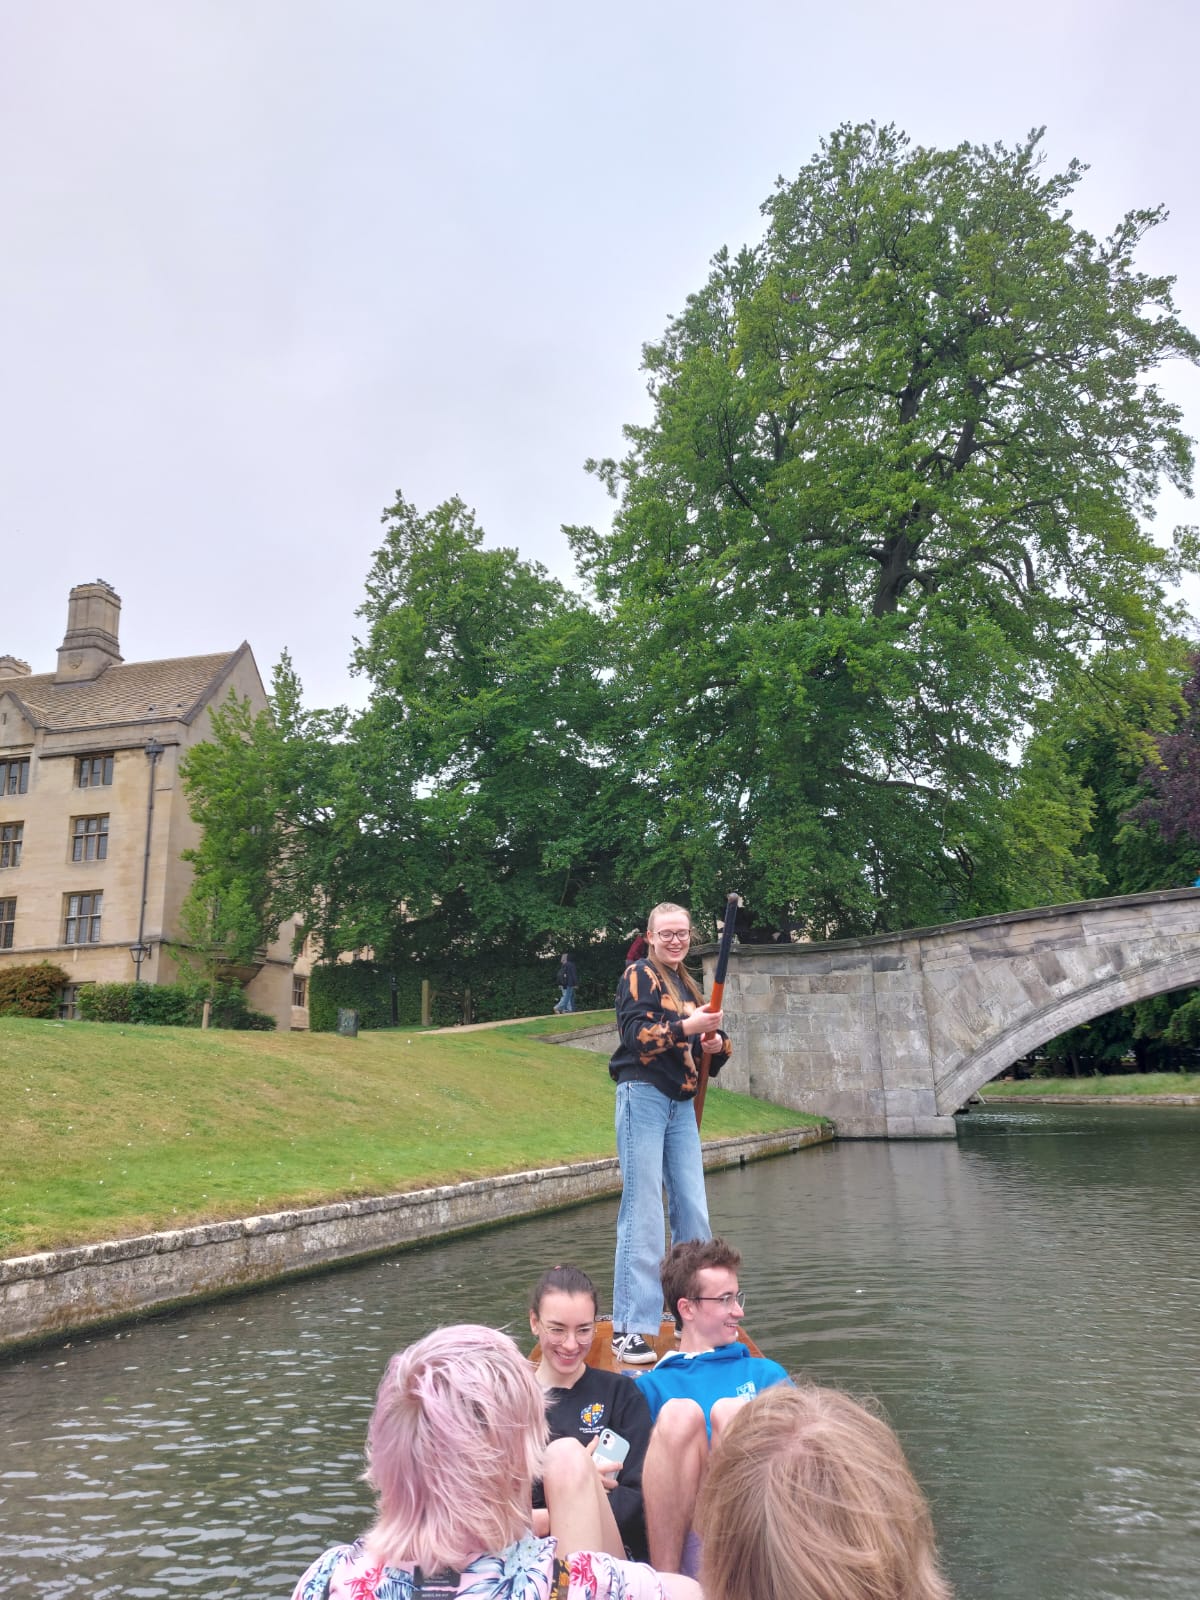 rachel stands on a punt, holding a punting pole, while her friends sit inside and watch the view